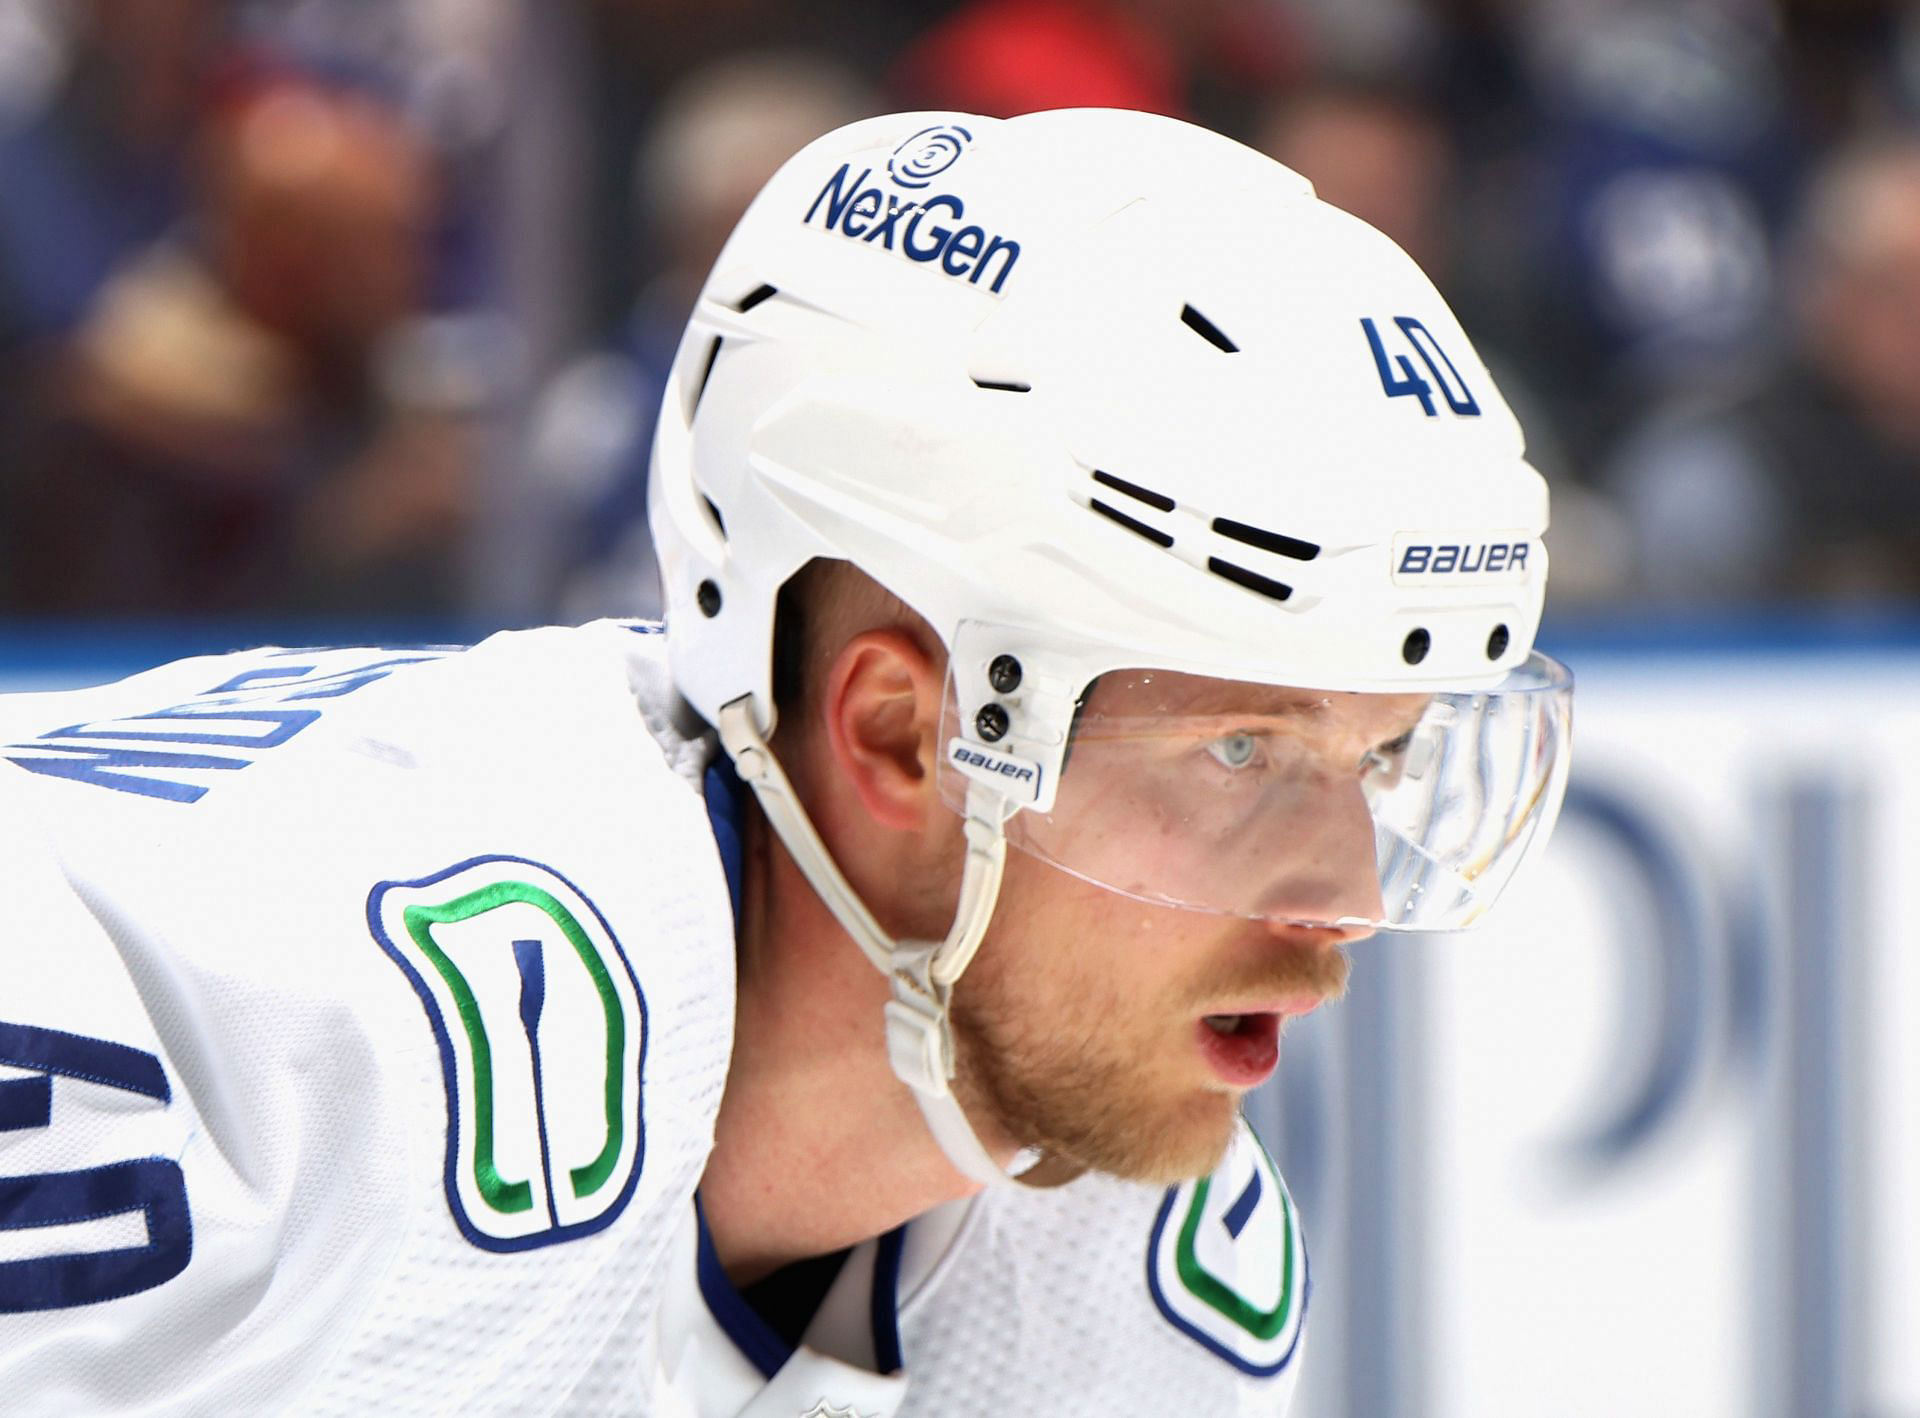 Elias Pettersson trade rumors Insider reports "advanced discussions